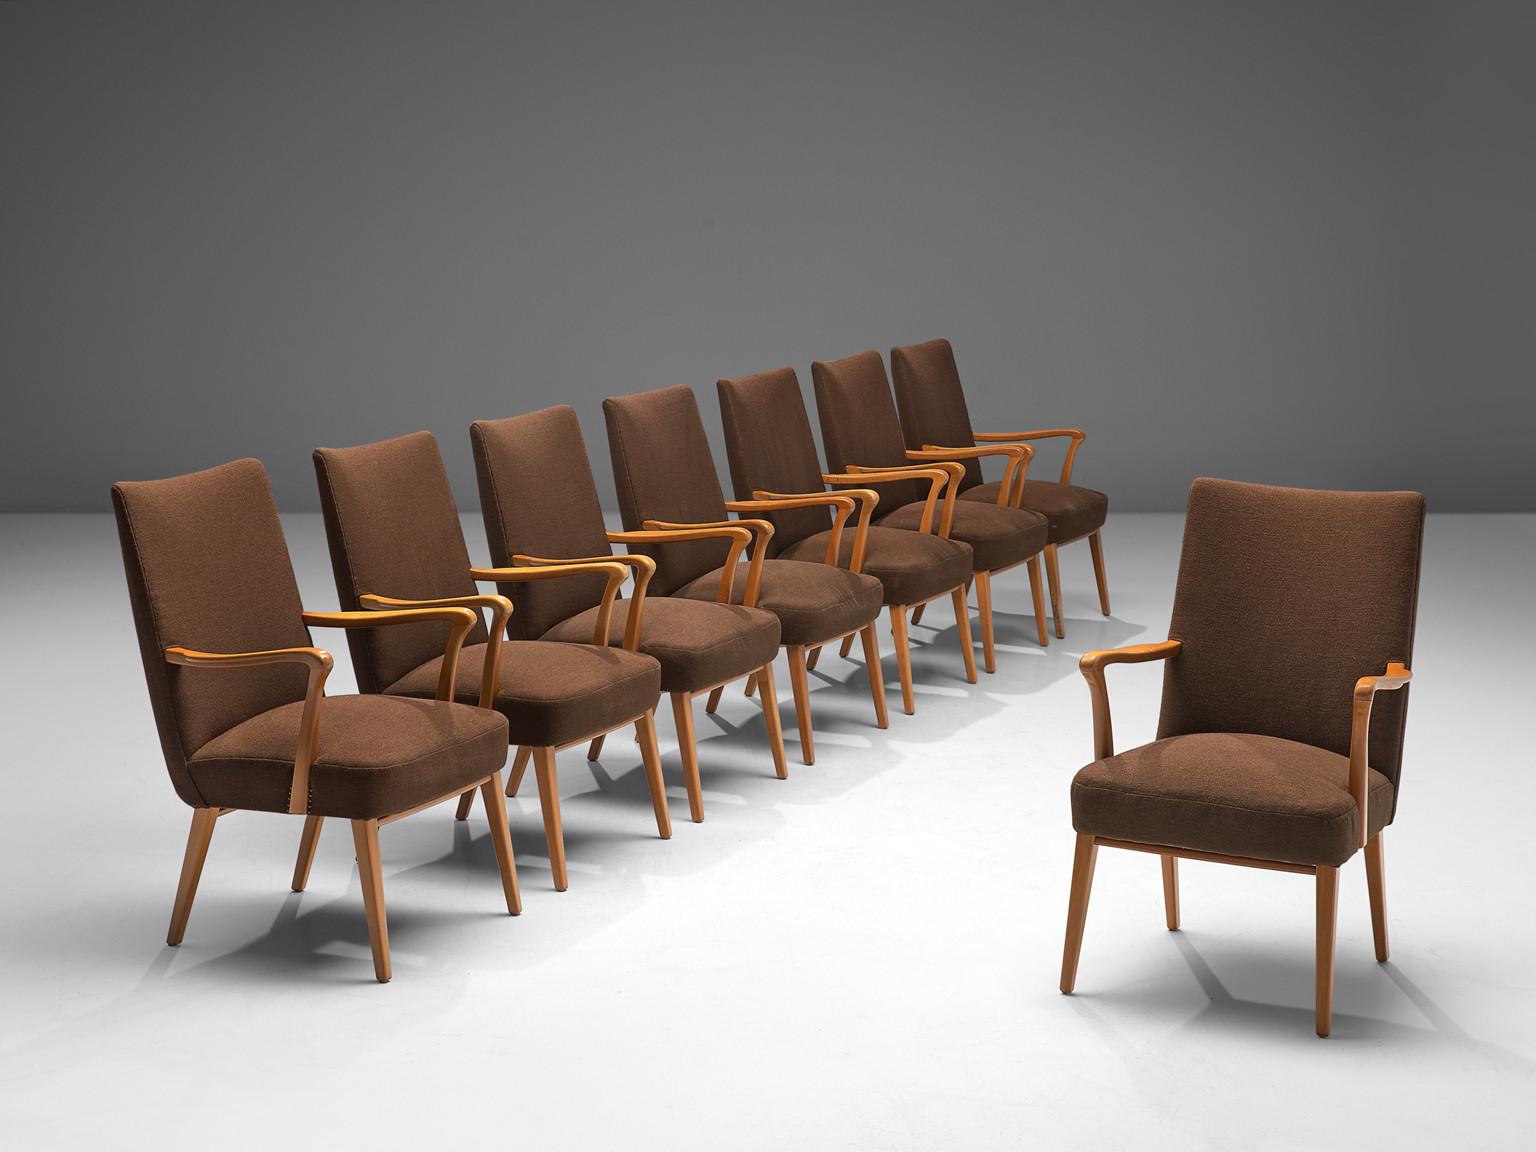 Set of eight armchairs, fabric, stained beech, metal, Denmark, 1960s

This Danish set of dining chairs features an elegant profile with curved lines and sleek shapes dominating the layout. The organically shaped armrests and the tapered feet enhance